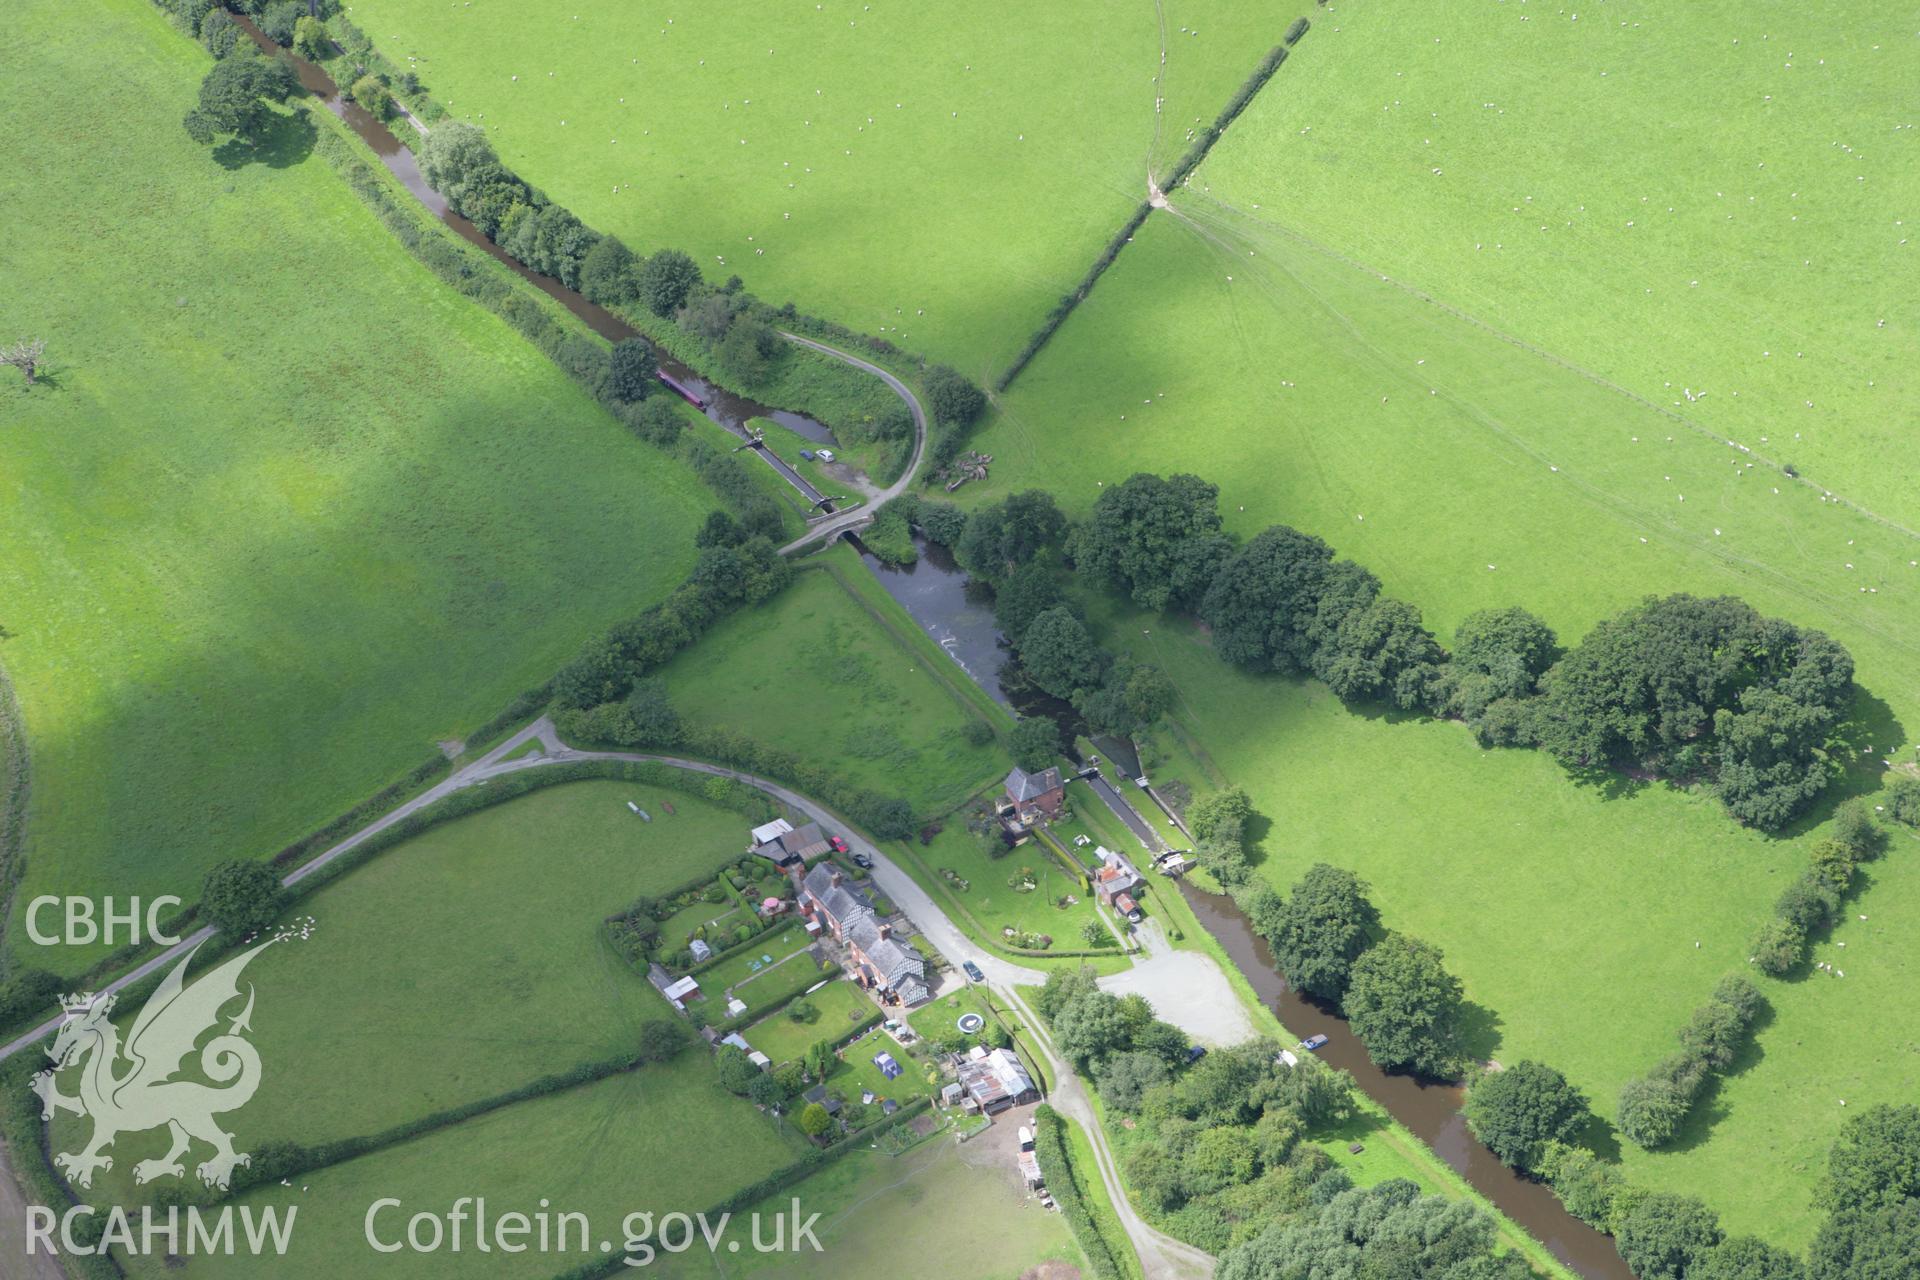 RCAHMW colour oblique aerial photograph of Shropshire Union Canal, Belan. Taken on 24 July 2007 by Toby Driver